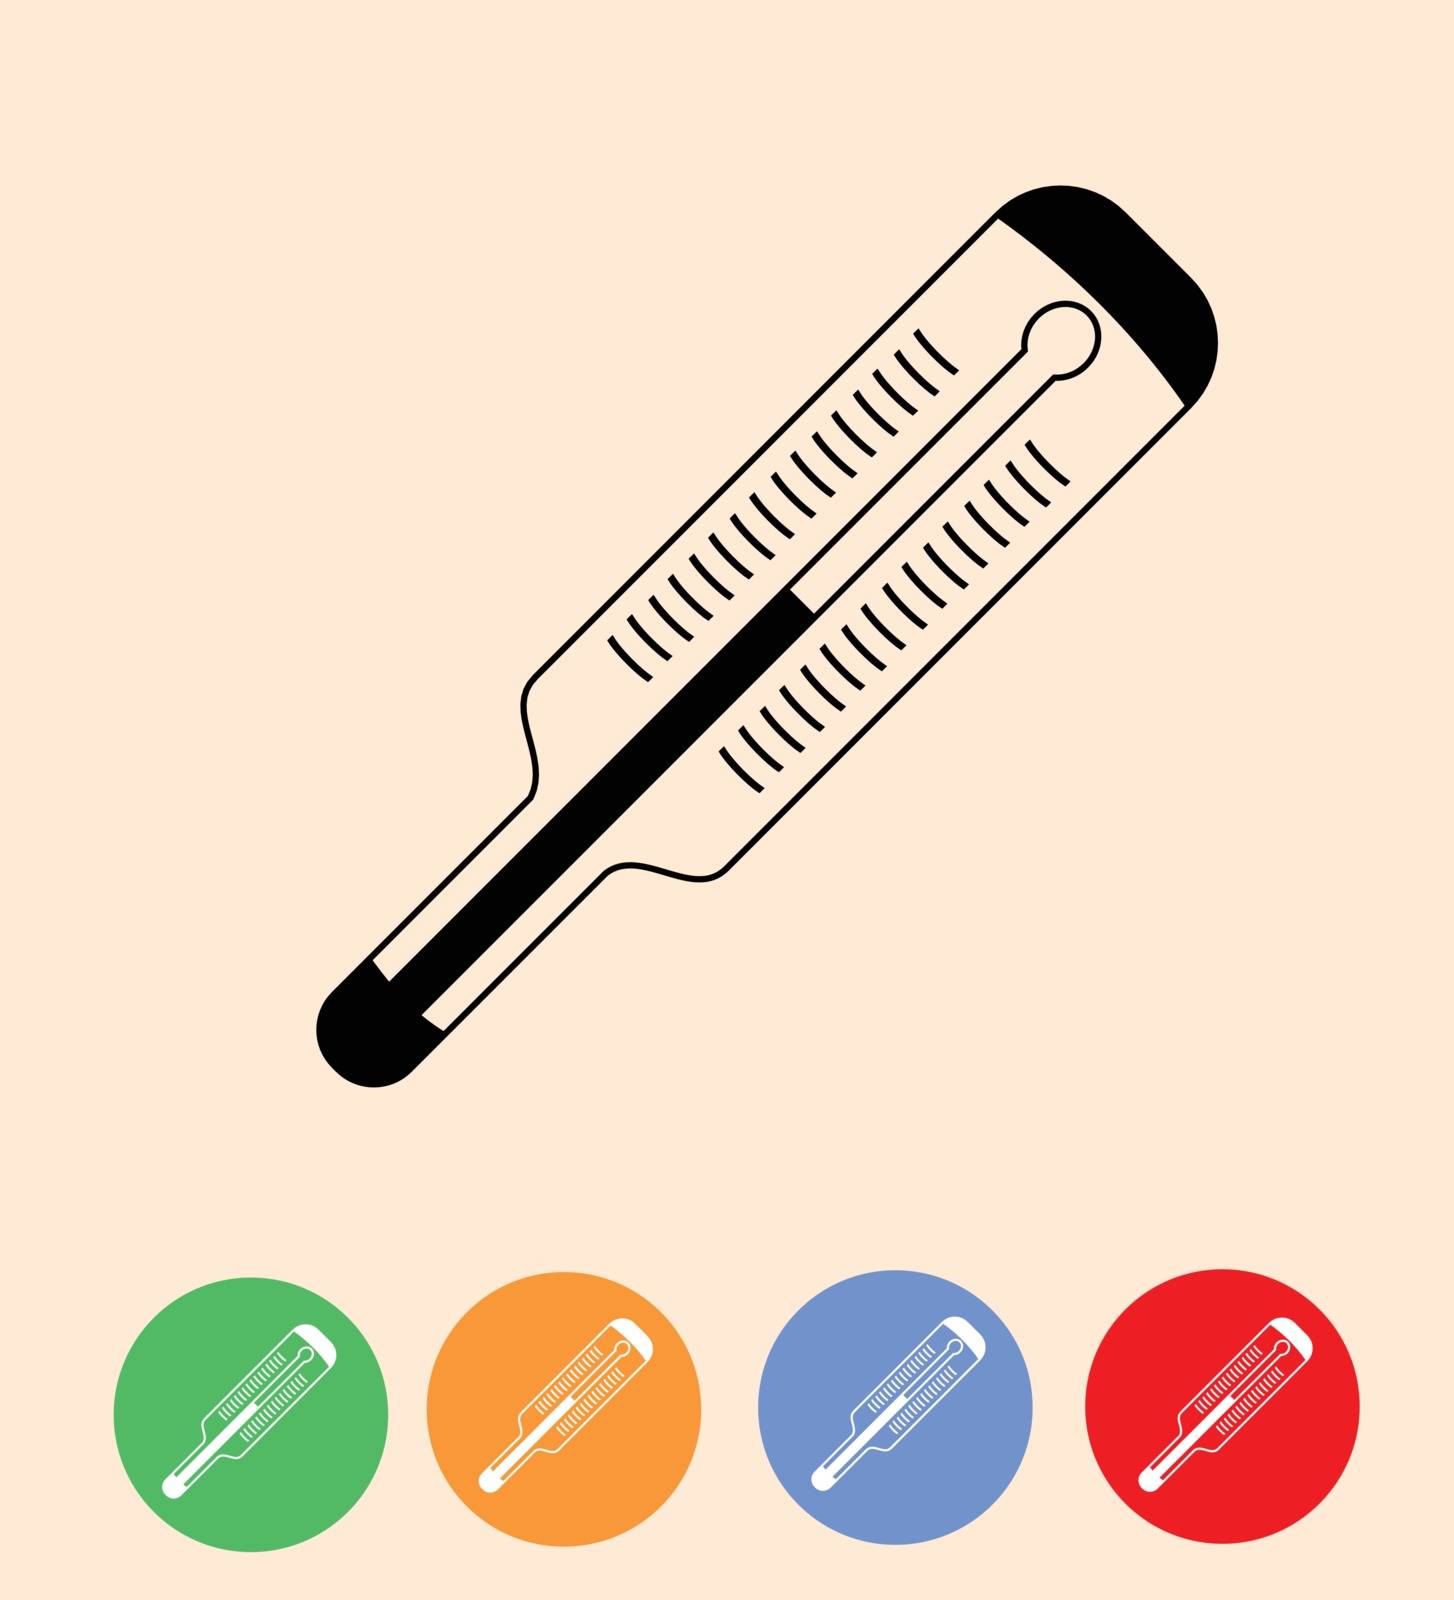 thermometer flat design icon vector eps 10